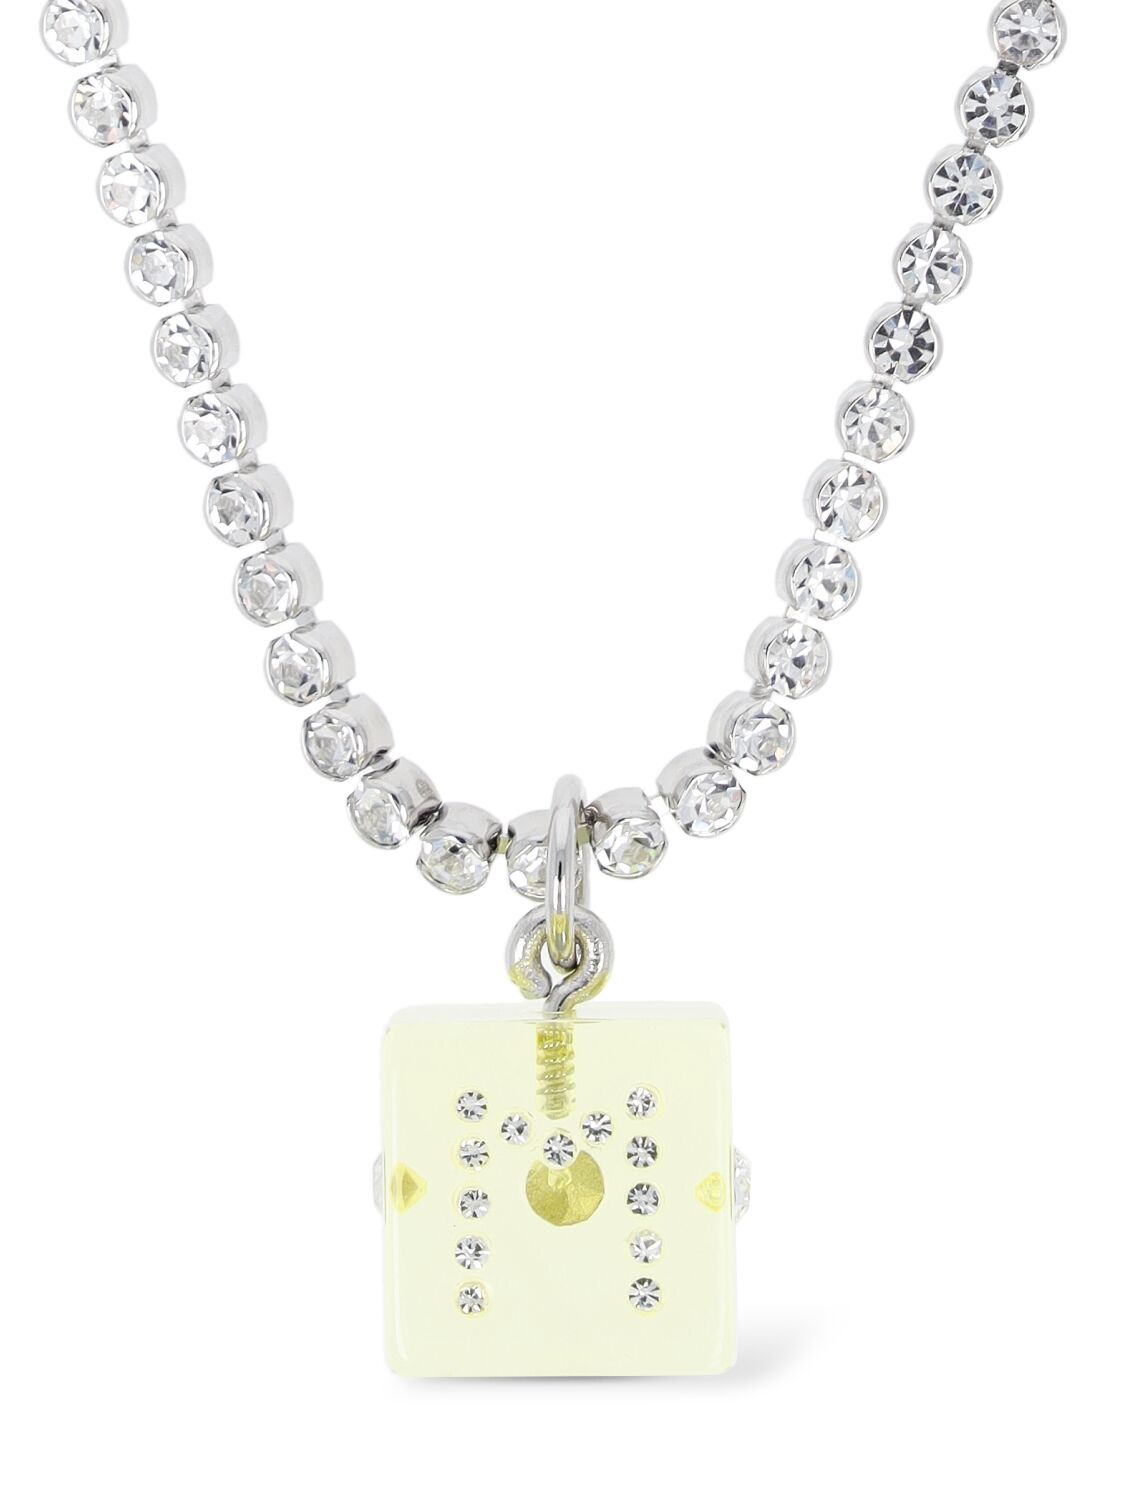 Marni Resin Collar Necklace W/ Dice & Crystal In Silver,yellow